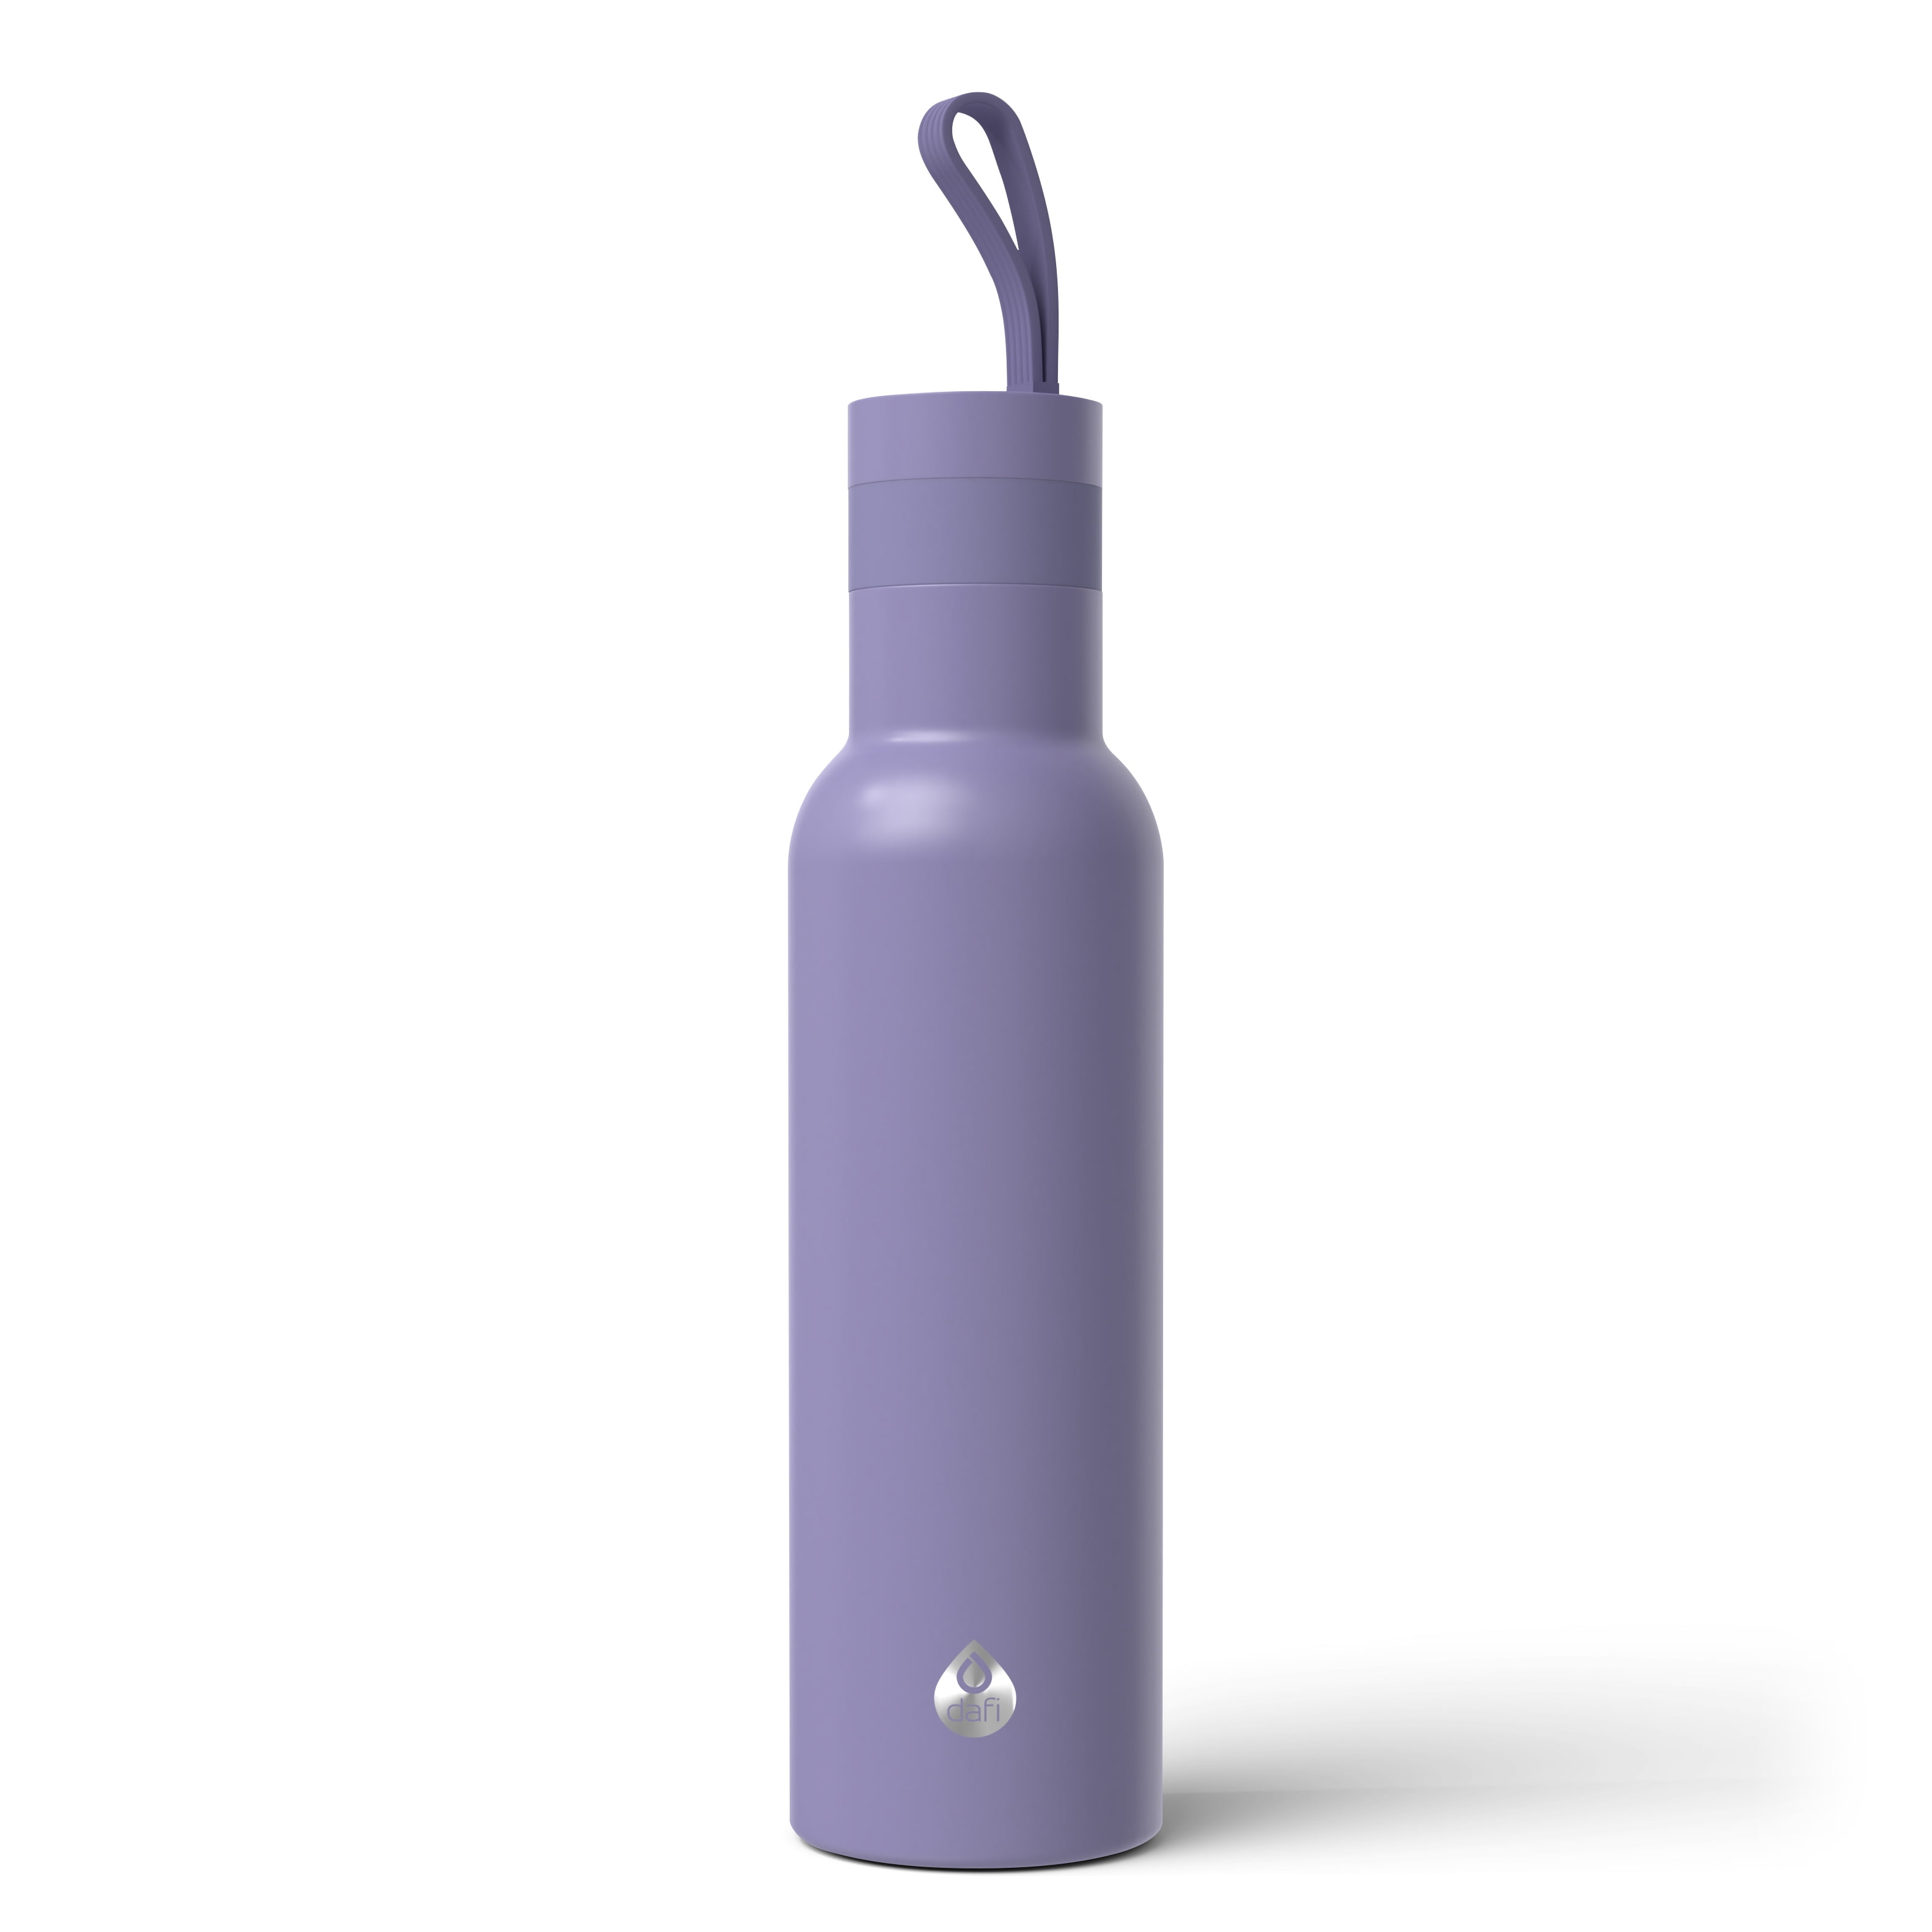 Details about   Dafi Double Wall Insulated Stainless Steel Thermal Bottle 17 Fl Oz Made Europe 